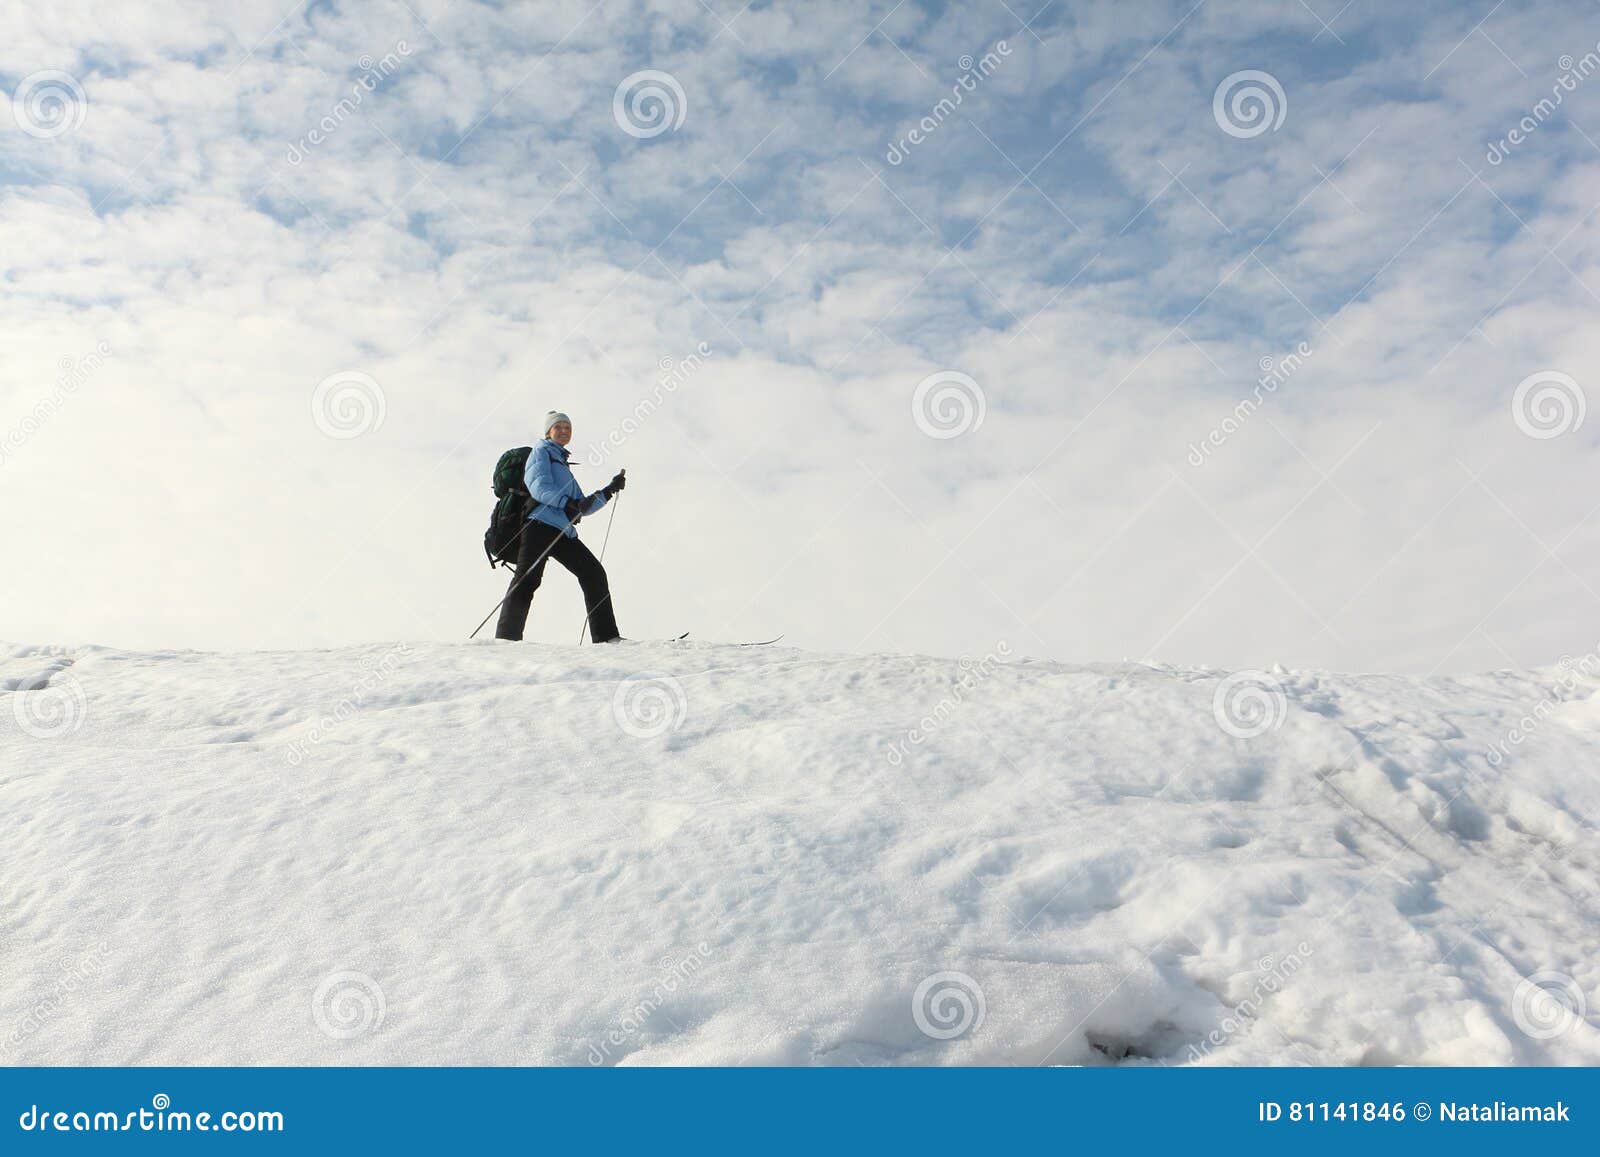 The Woman Traveler with Backpack Skiing on the Snow Stock Photo - Image ...